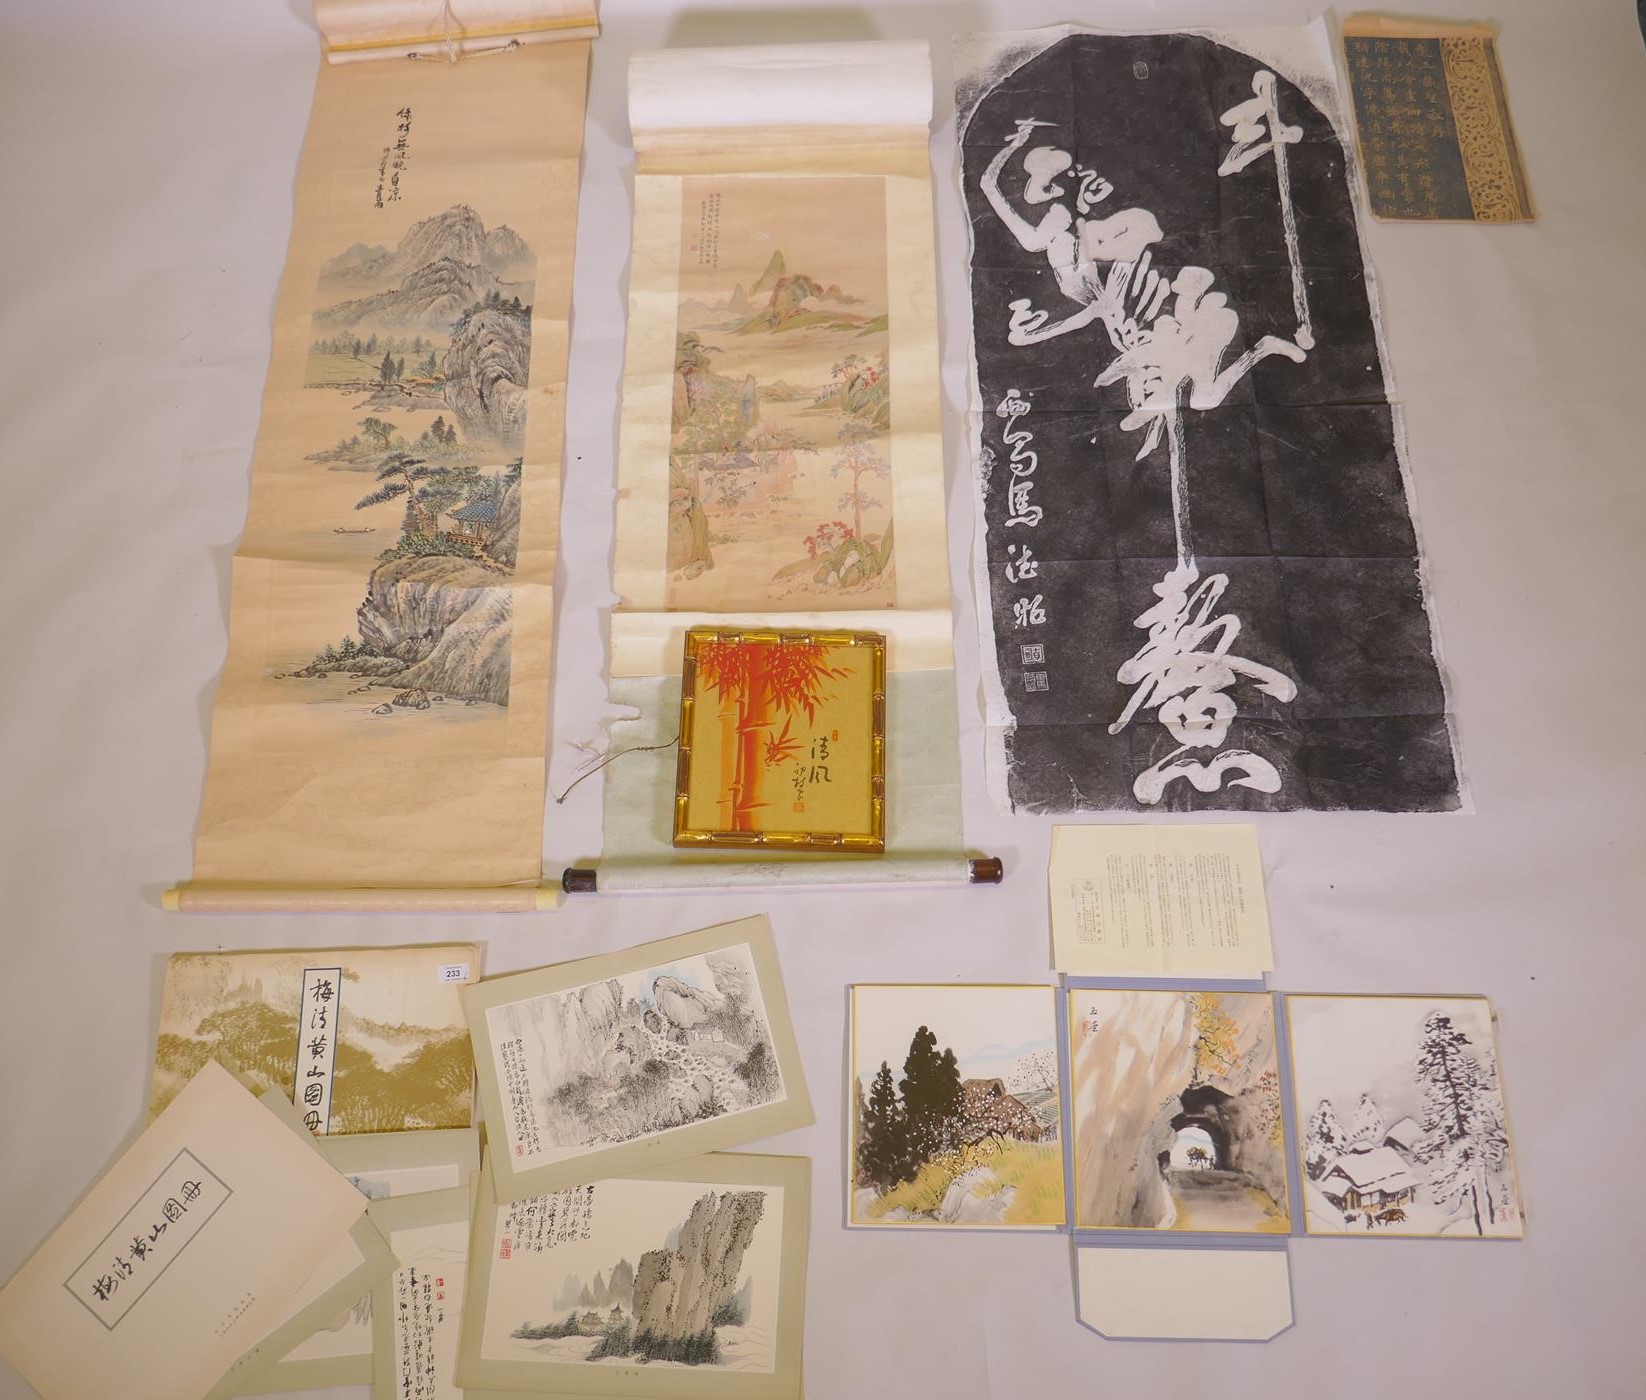 A folio of Chinese watercolour prints from the Palace Museum Collection, a Japanese folio of three